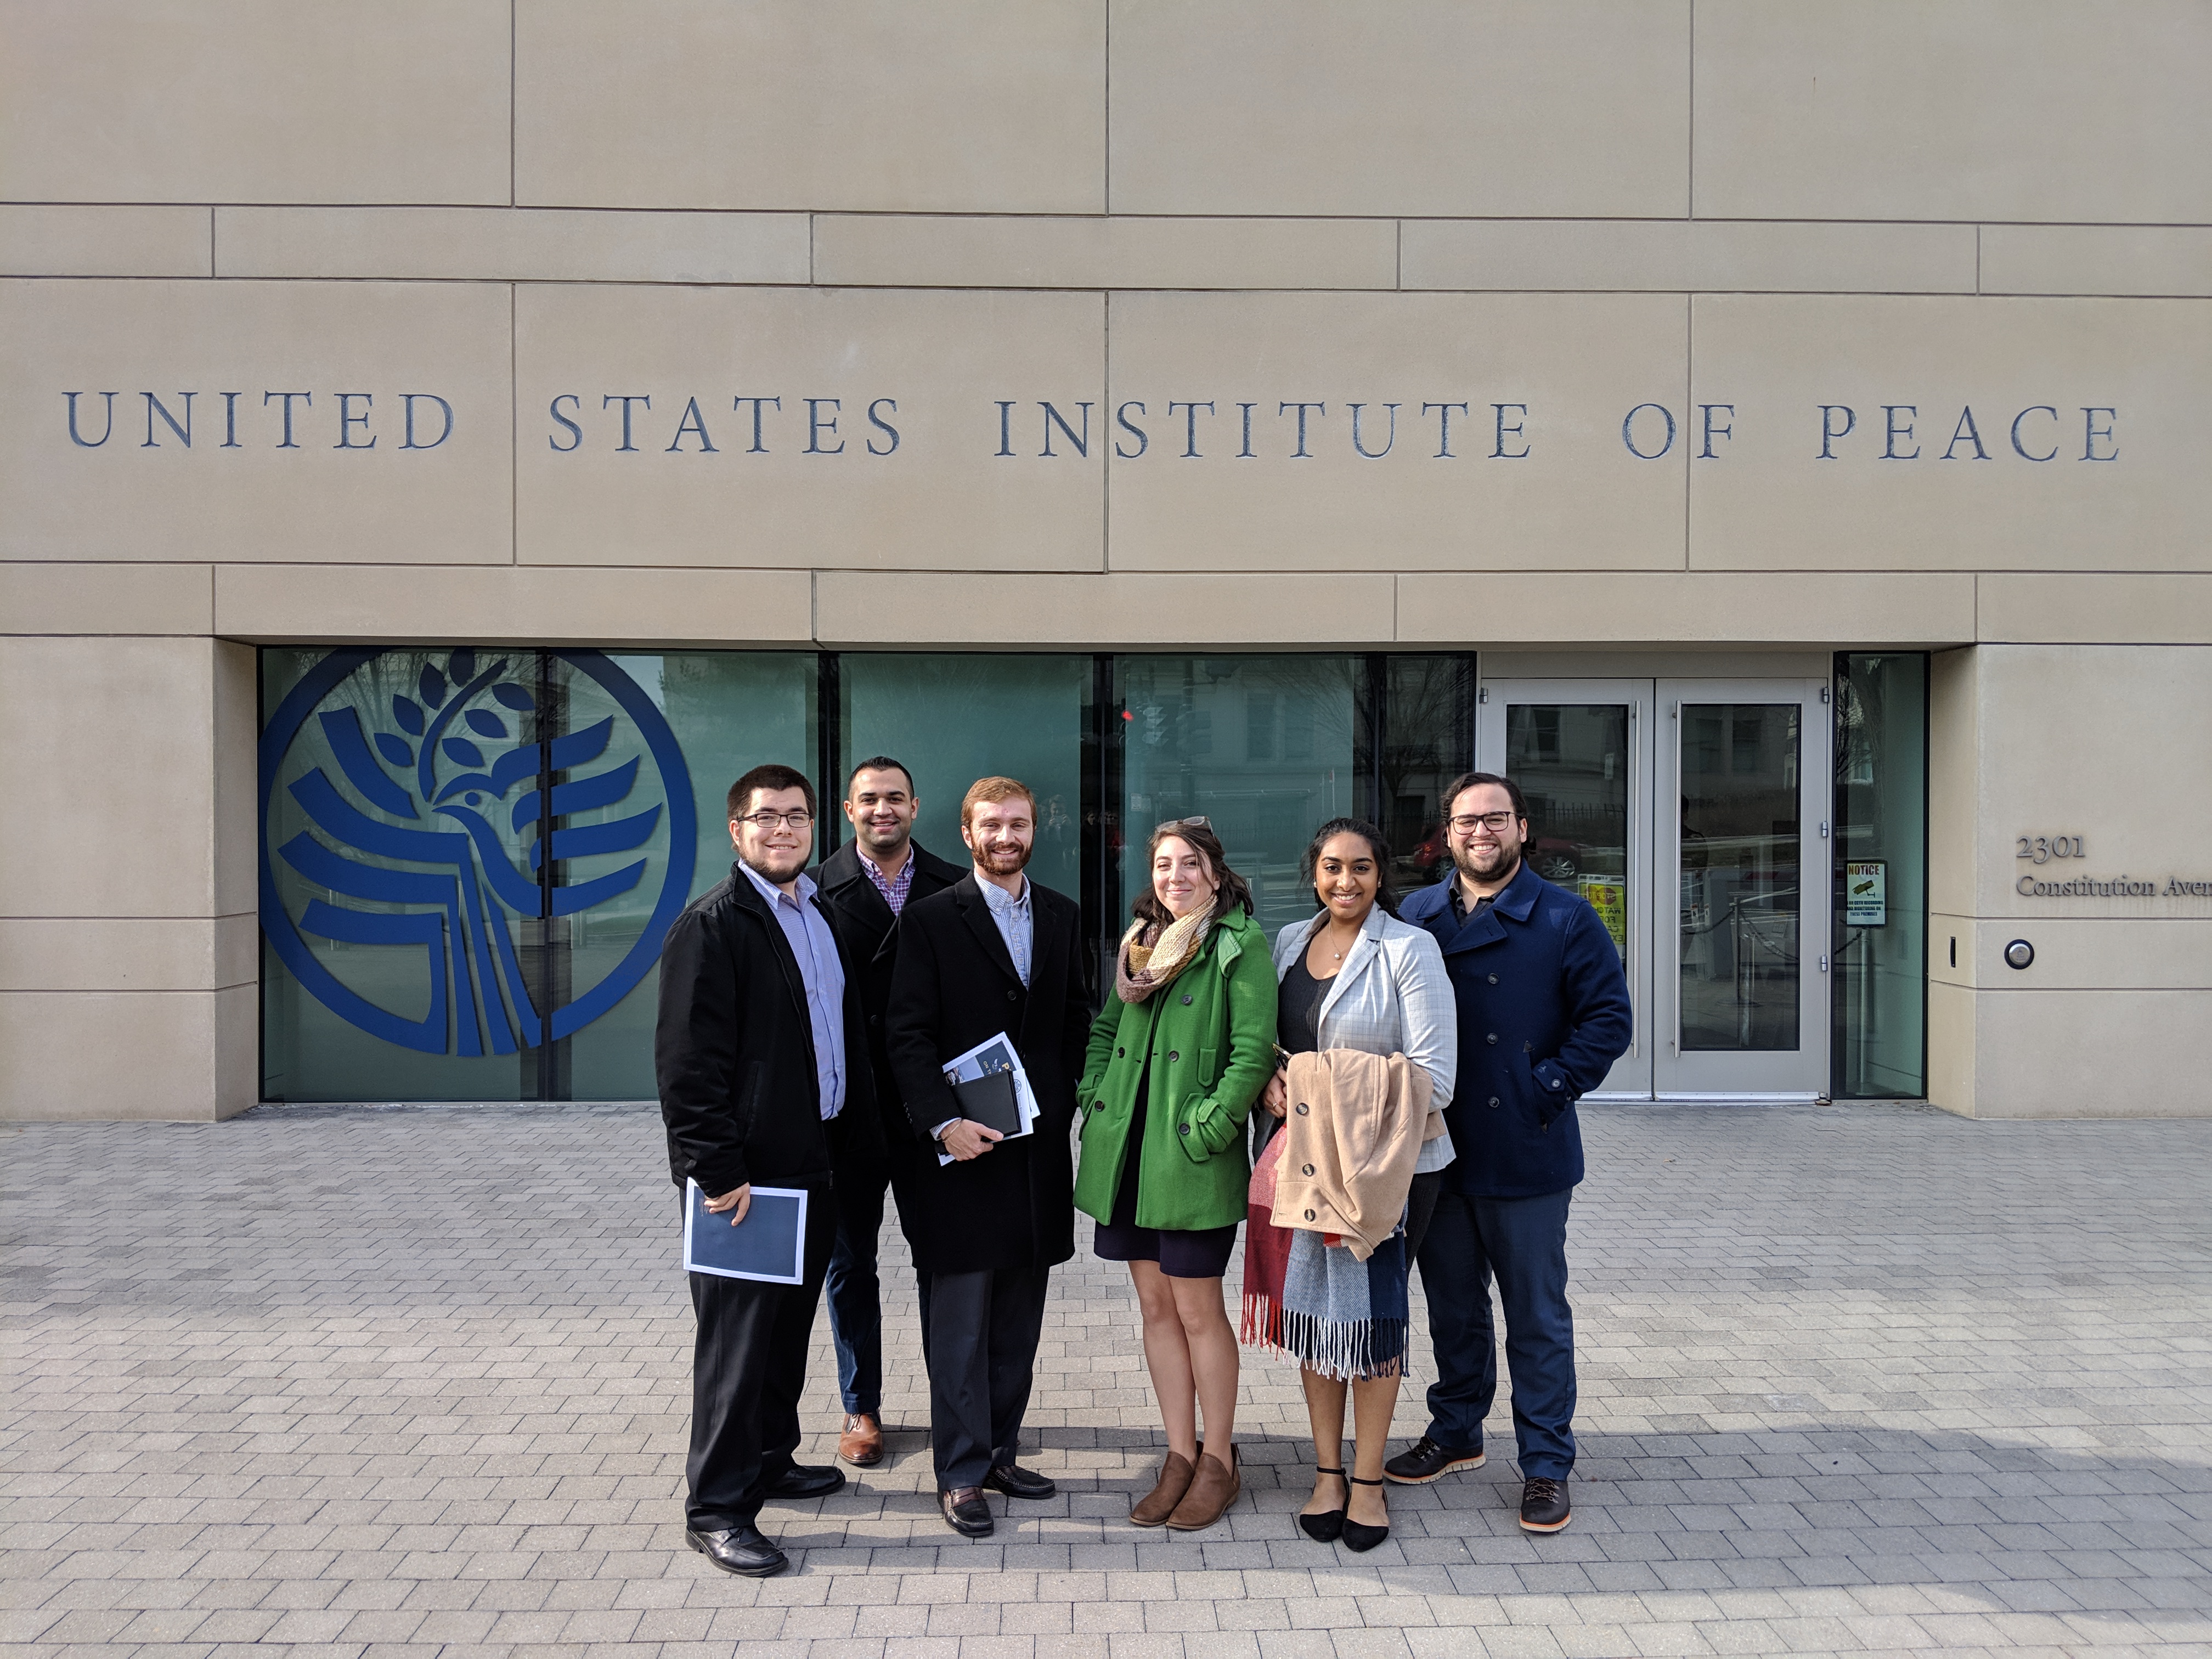 Students met with experts at the United States Institute of Peace.